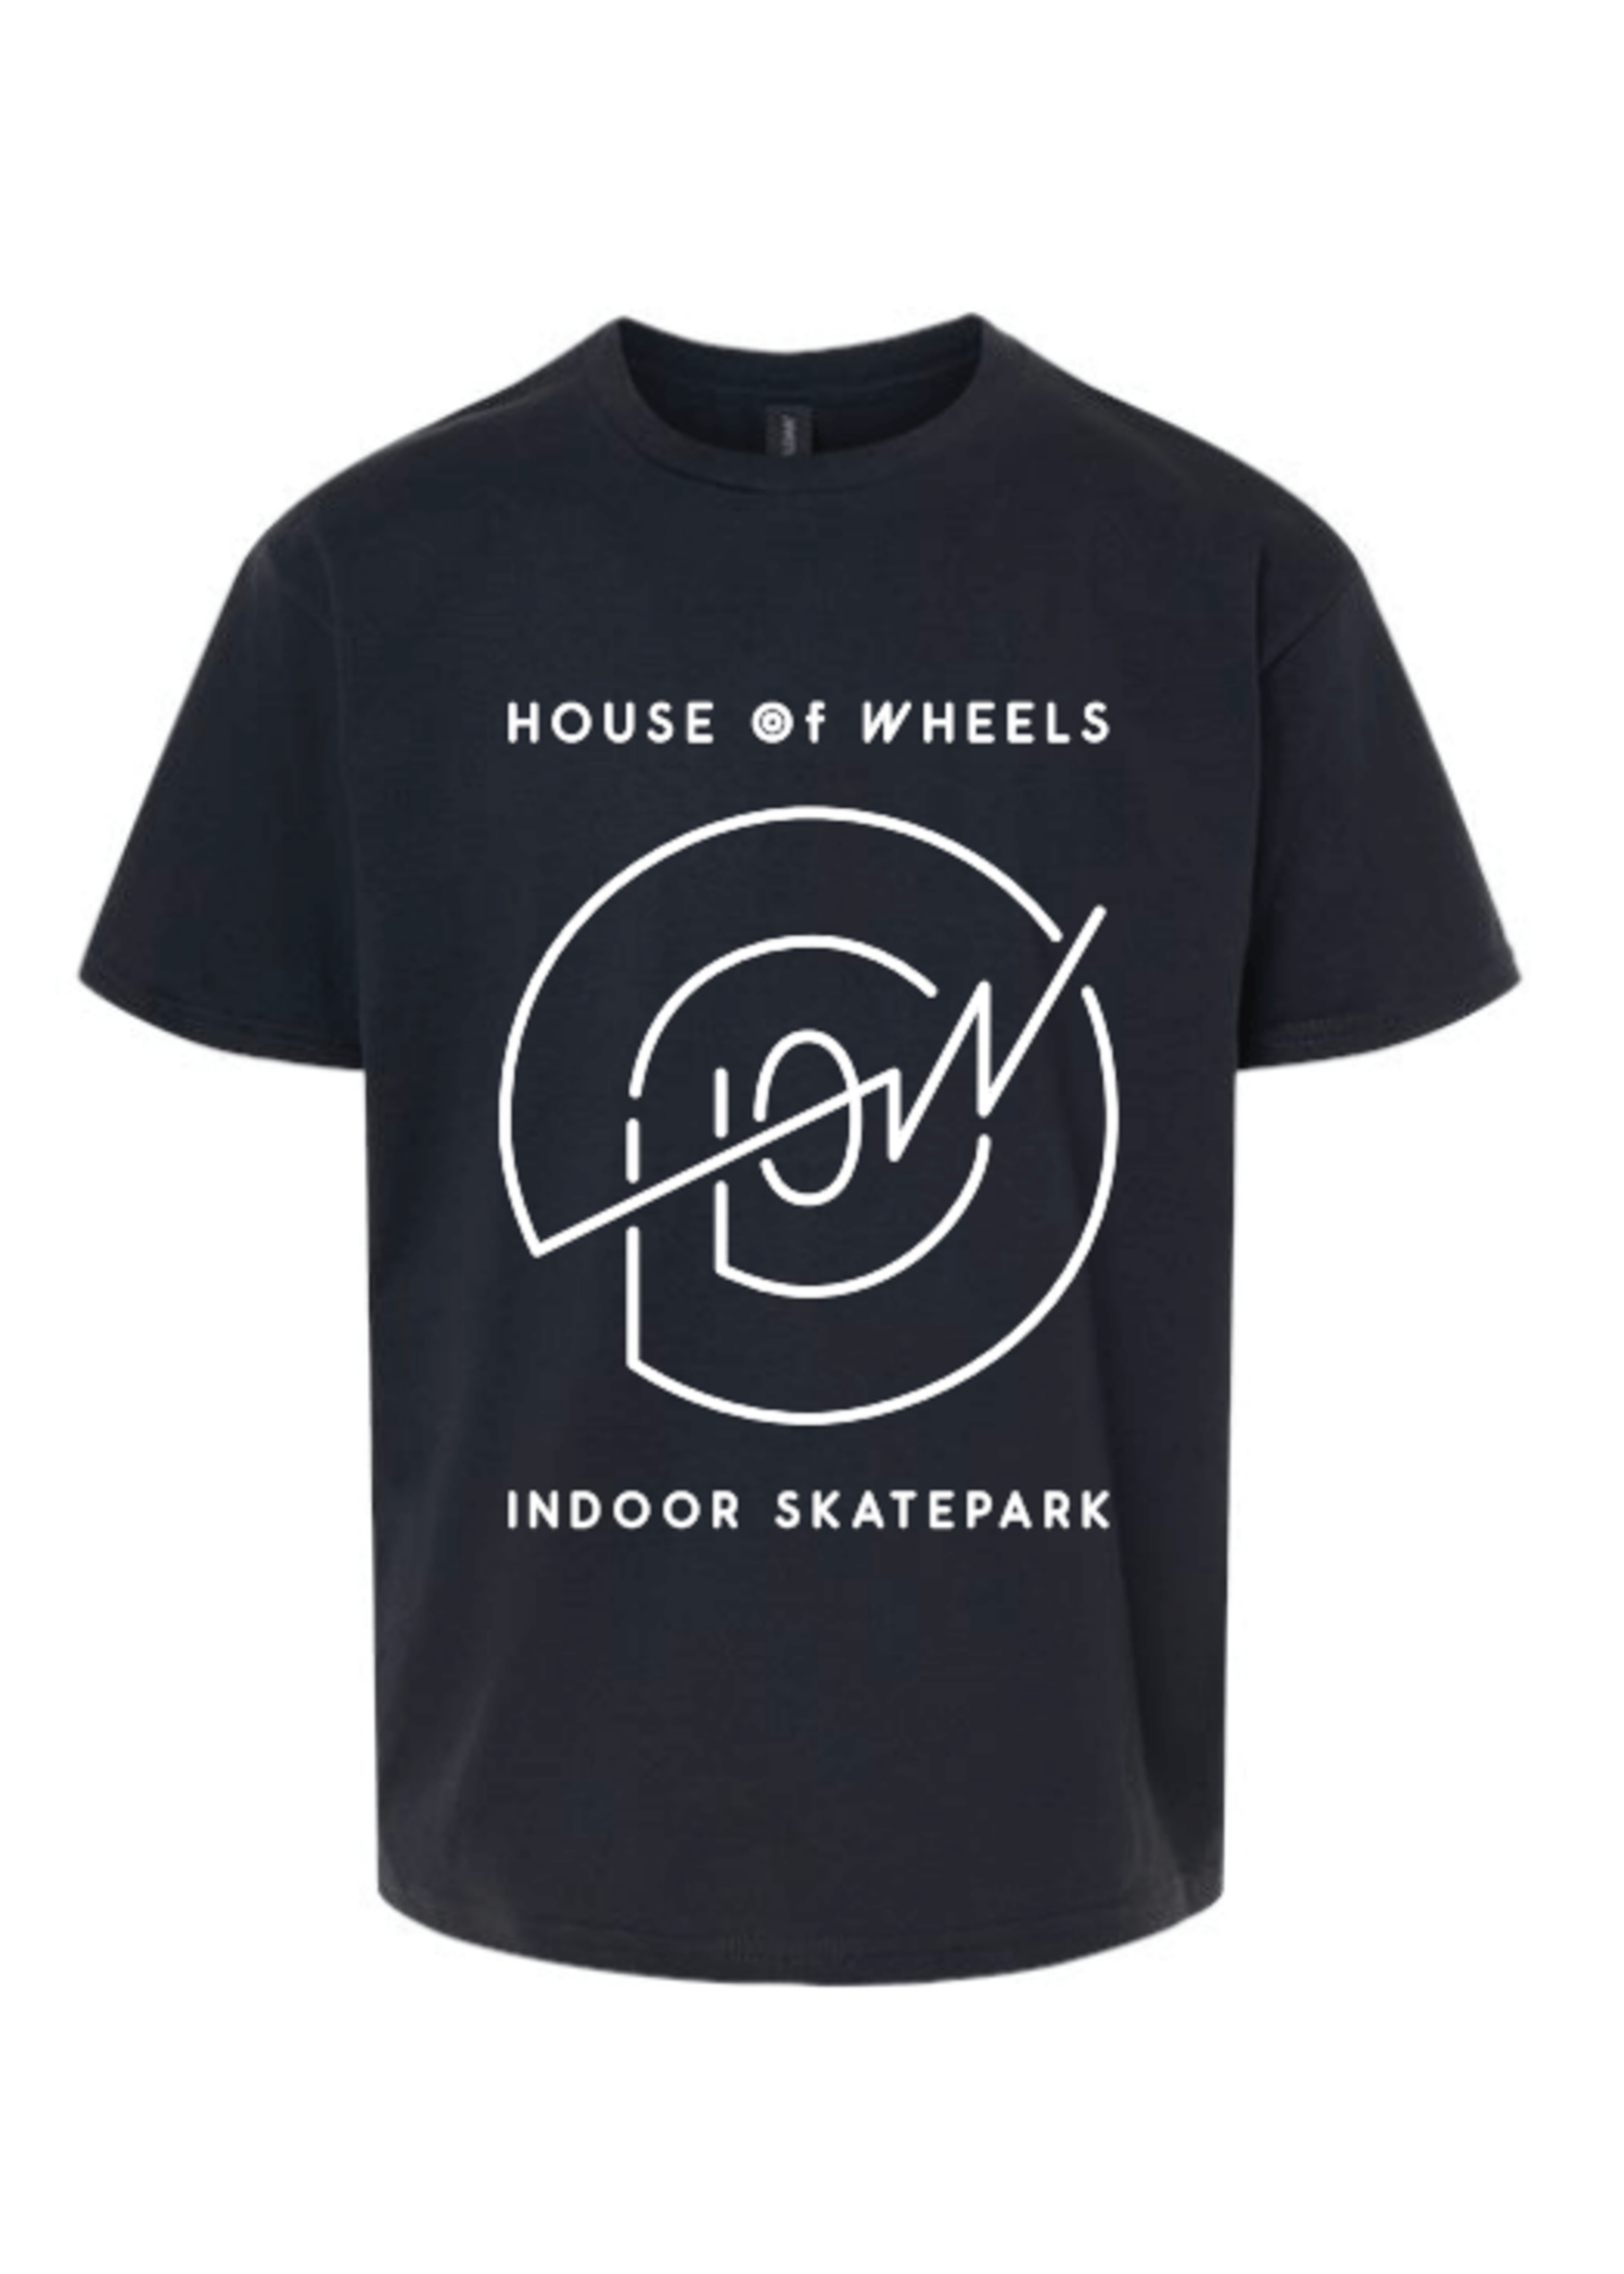 House of Wheels HOW - T-shirt indoor skatepark (youth) - PRE ORDER